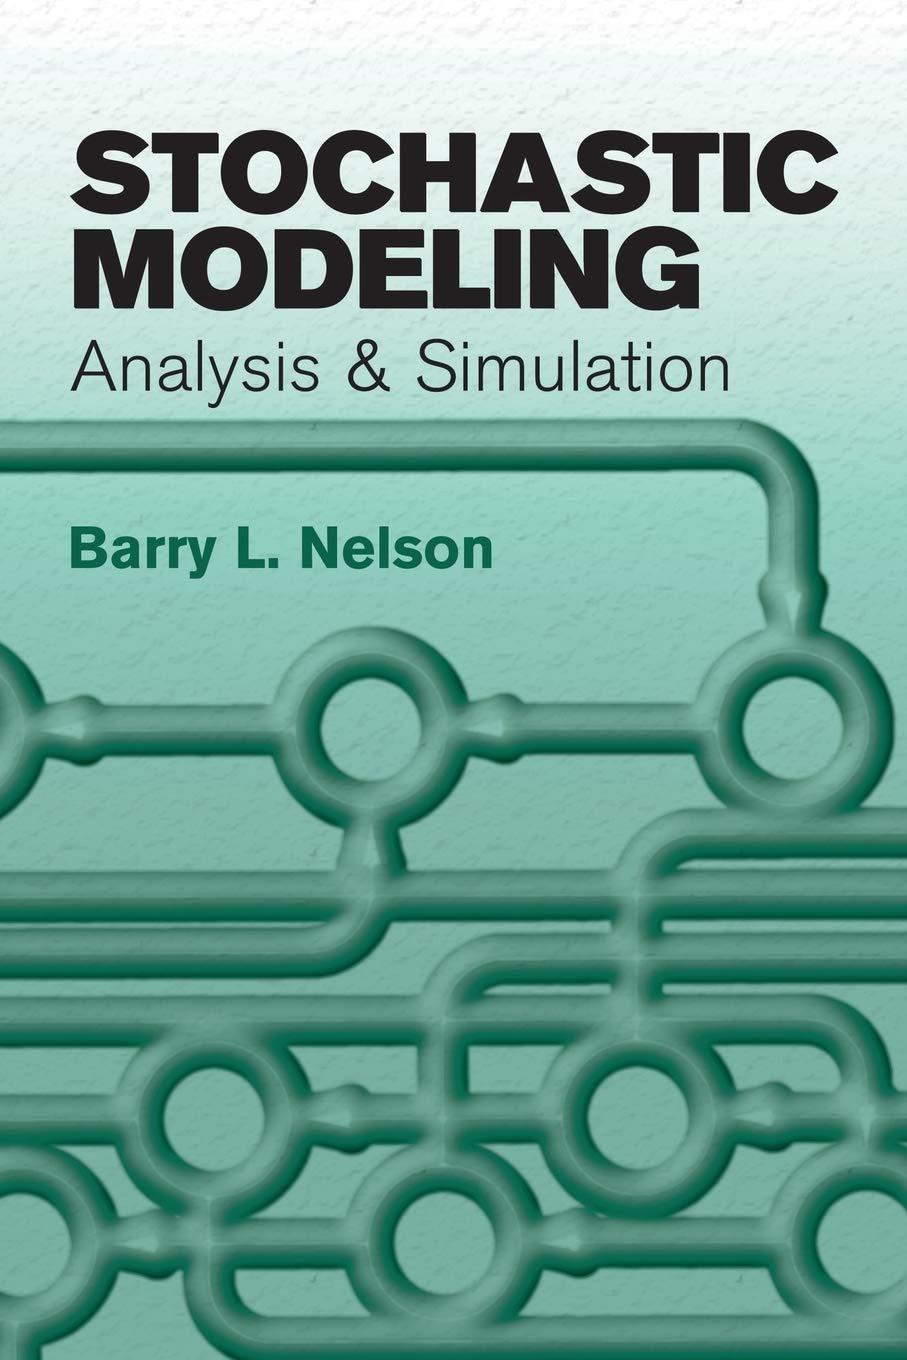 stochastic modeling analysis and simulation 1st edition barry l. nelson 0486477703, 9780486477701